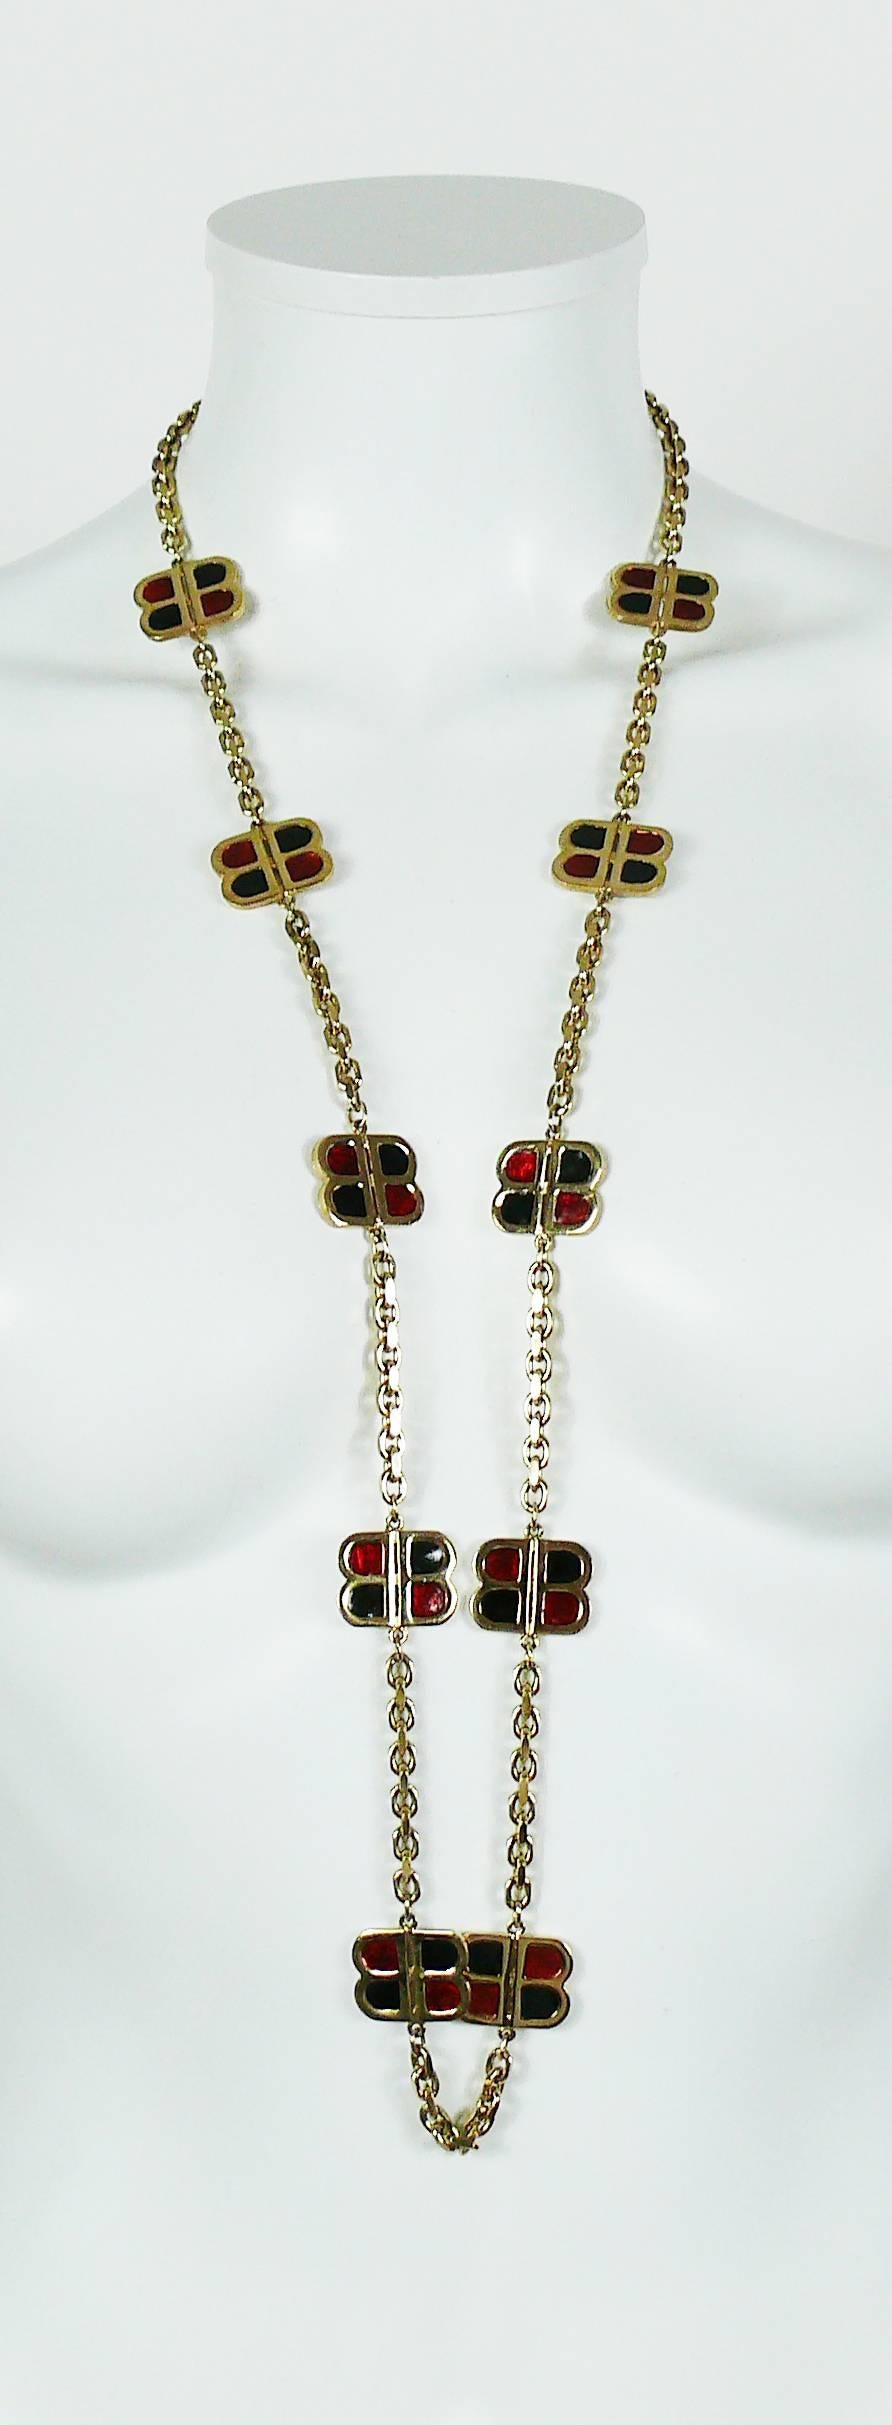 BALENCIAGA vintage sautoir necklace featuring a heavy gold toned chain and ten black-red enamel BB signature monogram logos.

Slips on.

Unmarked.

Indicative measurements : total length approx. 94 cm (37 inches) / logo 2.5 cm x 2 cm (0.98 inch x